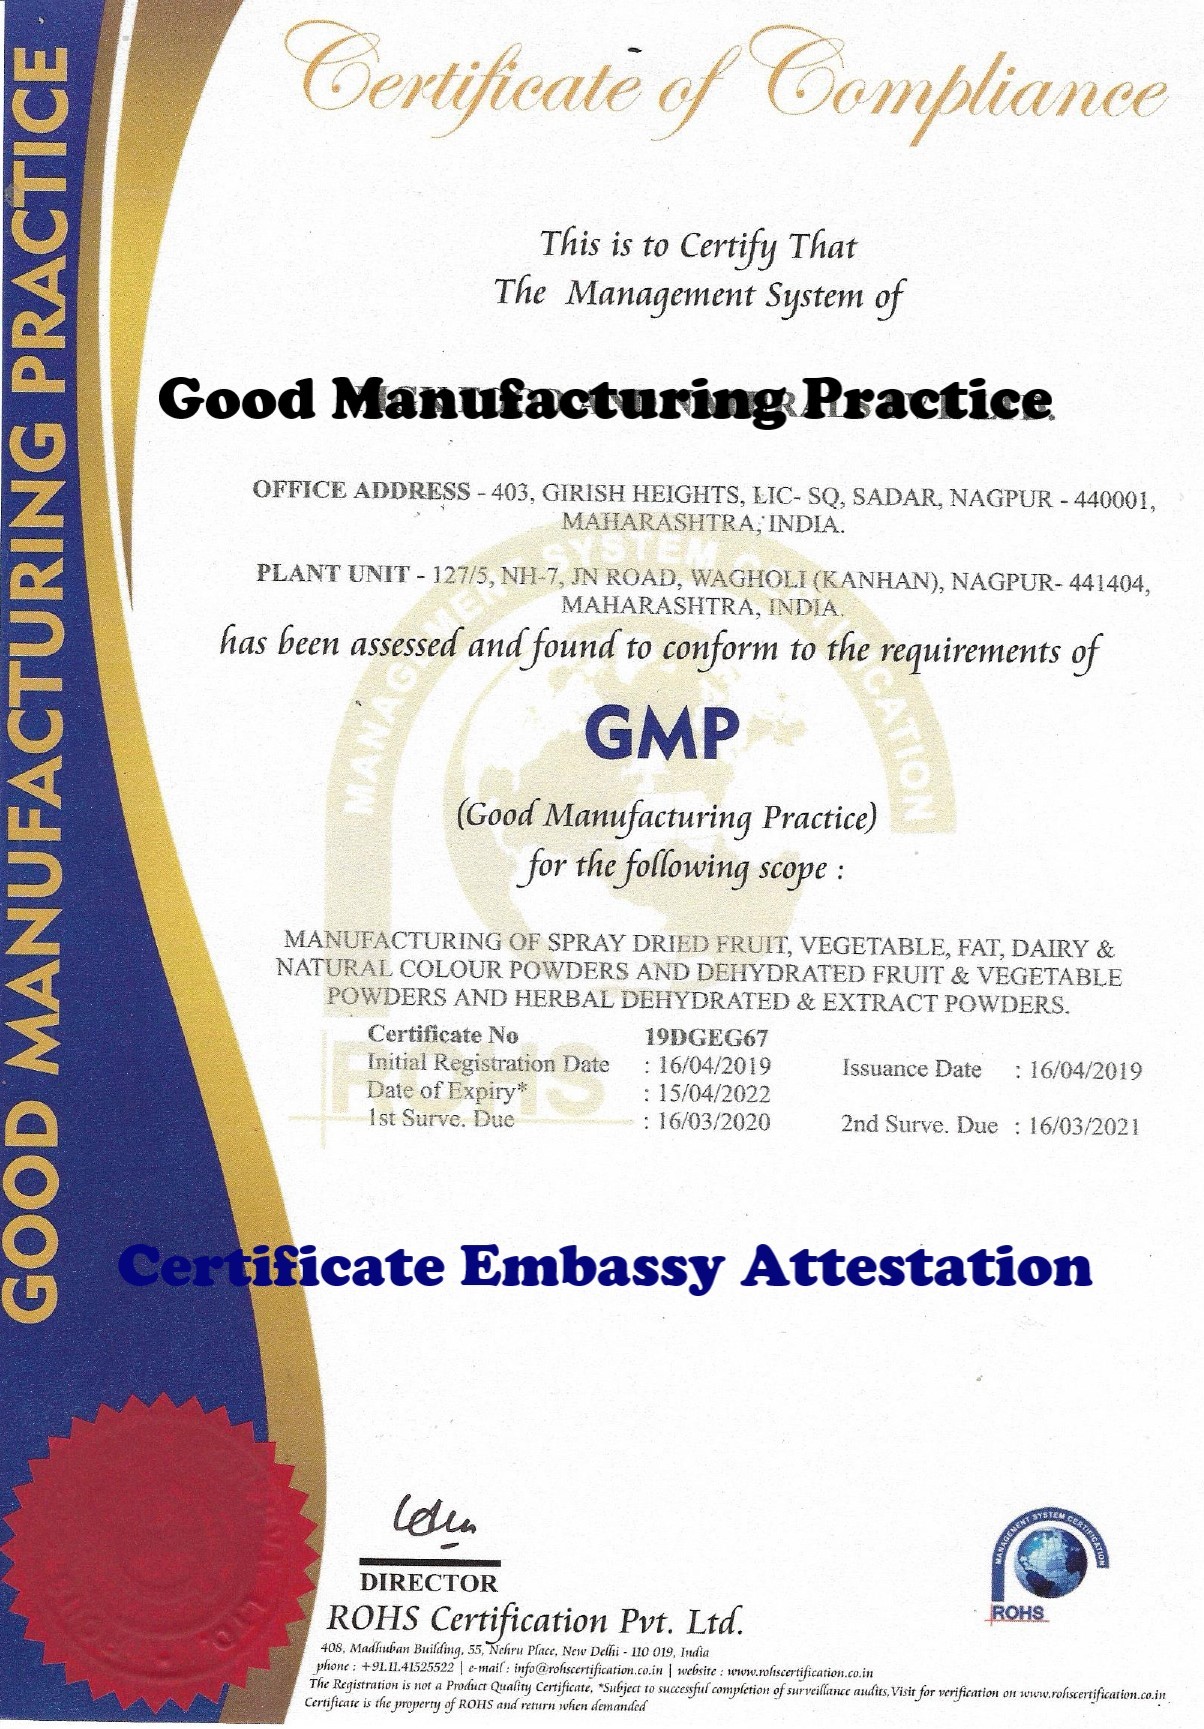 GMP Certificate Attestation from Norway Embassy